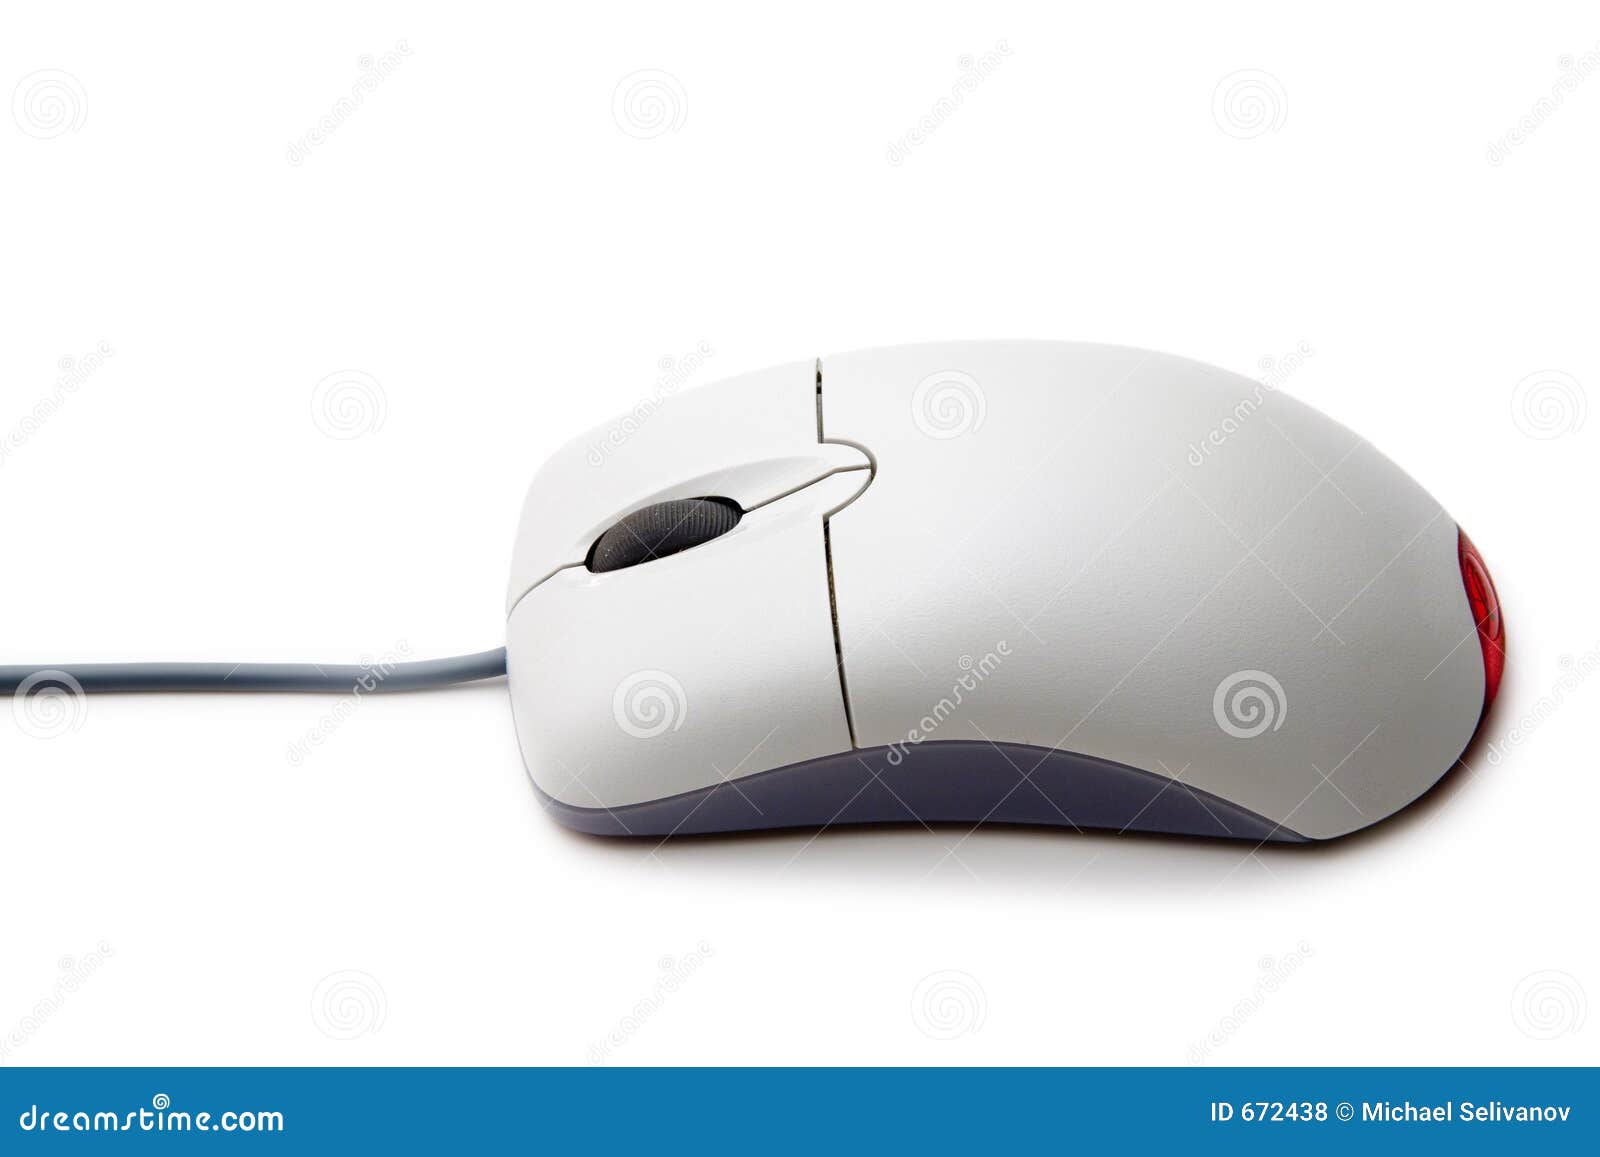 Mouse Macro From The Top Royalty Free Stock Photos - Image ...